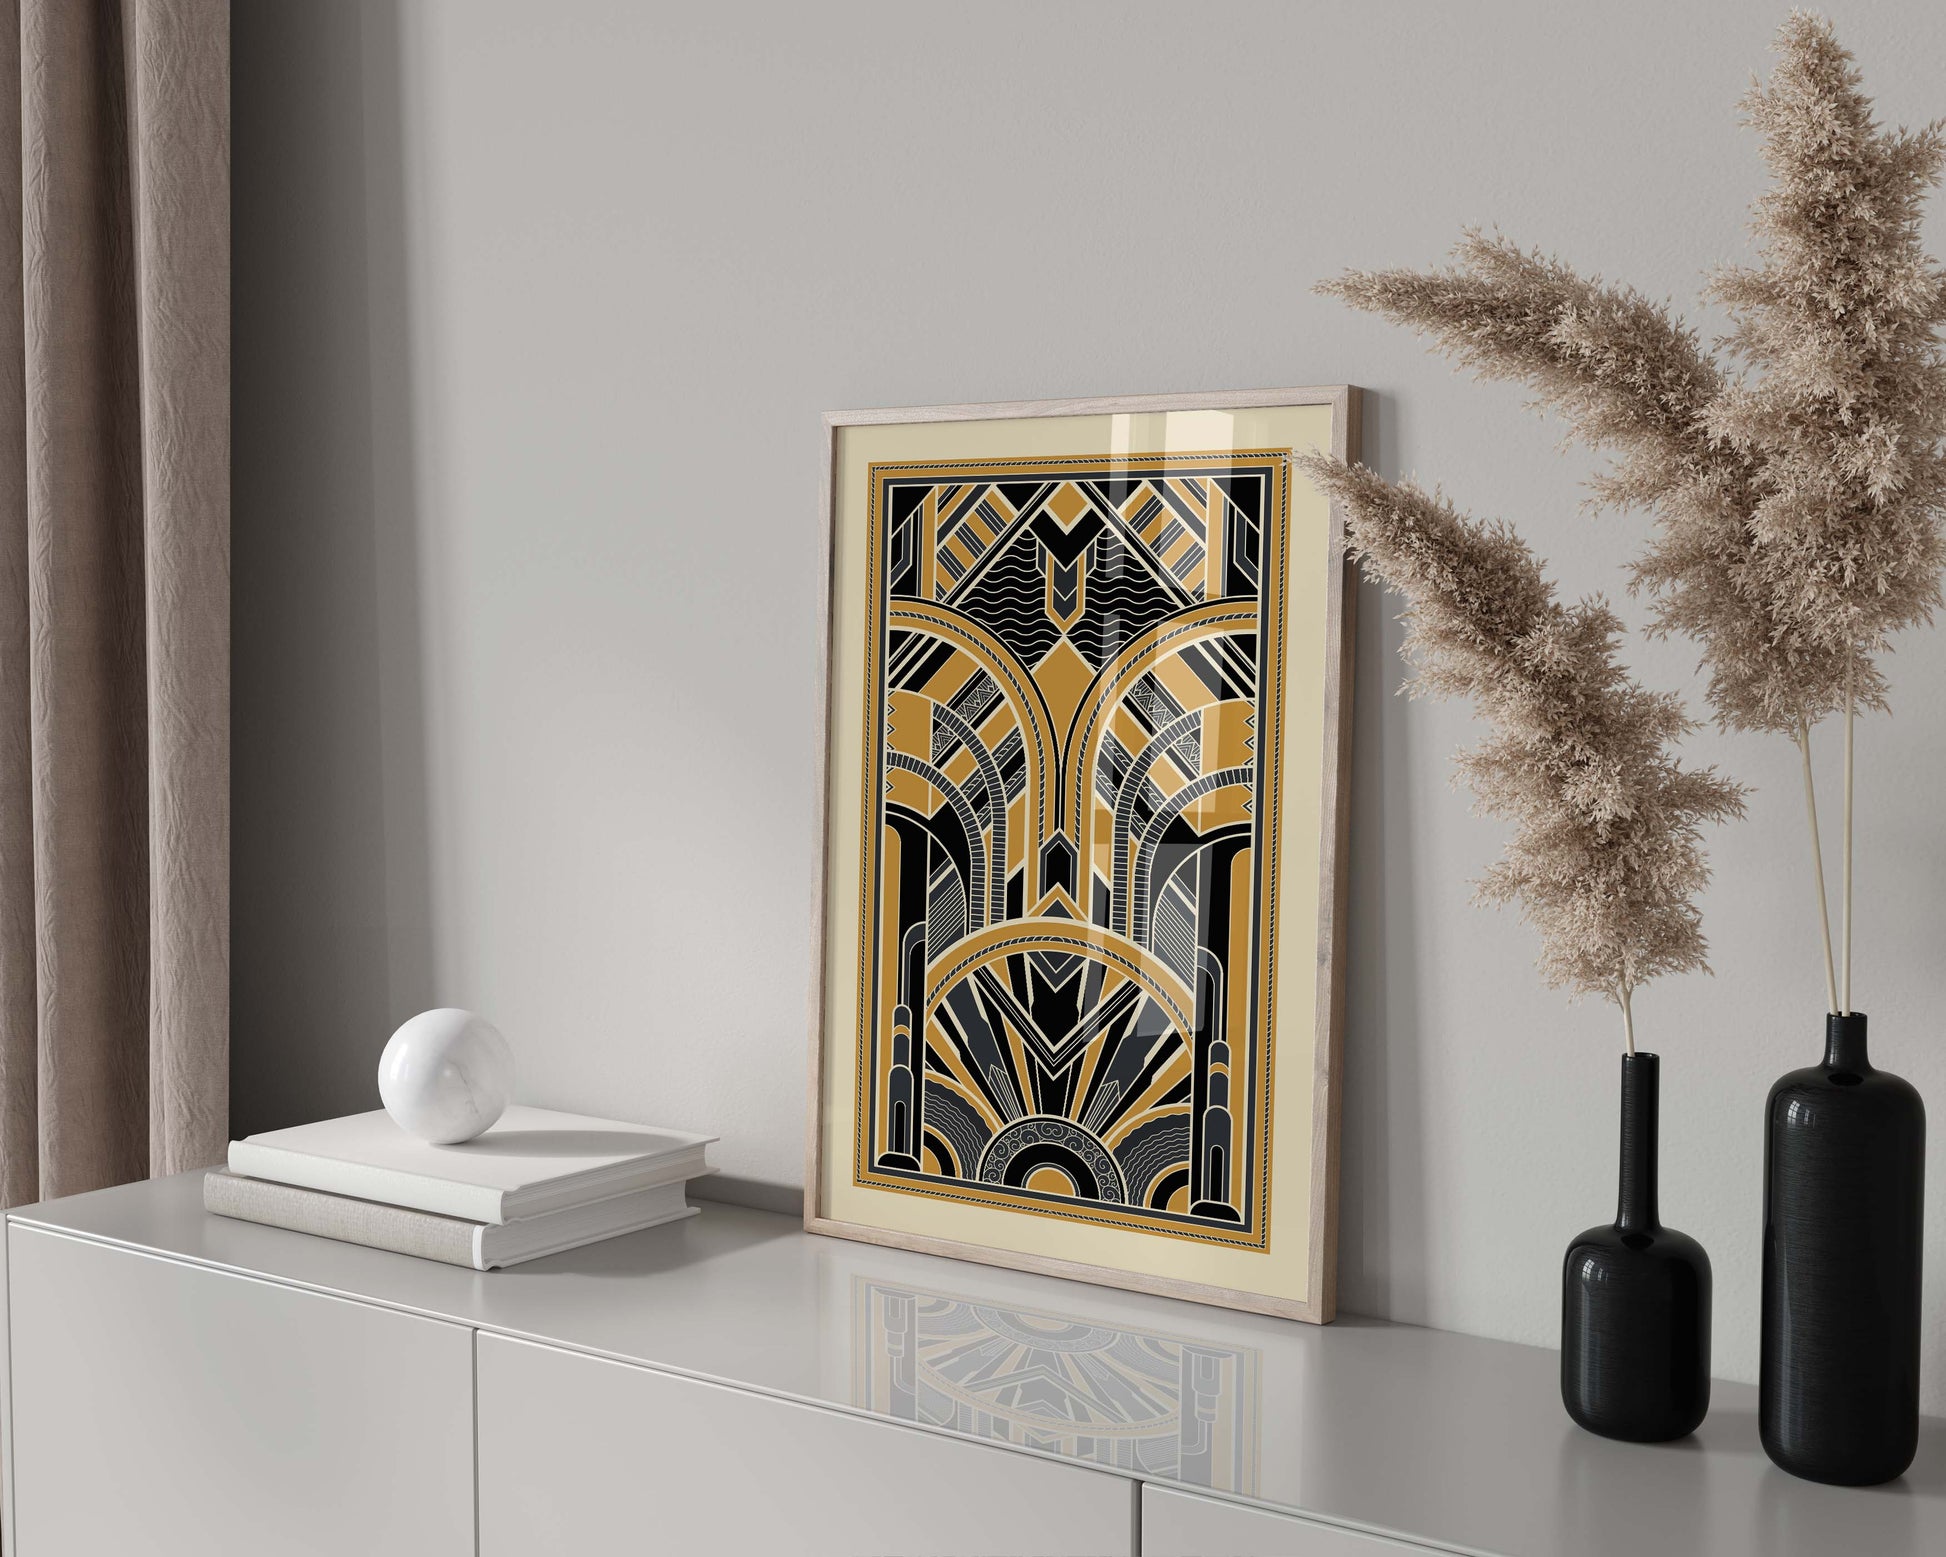 Black and gold art deco print with symmetrical pattern